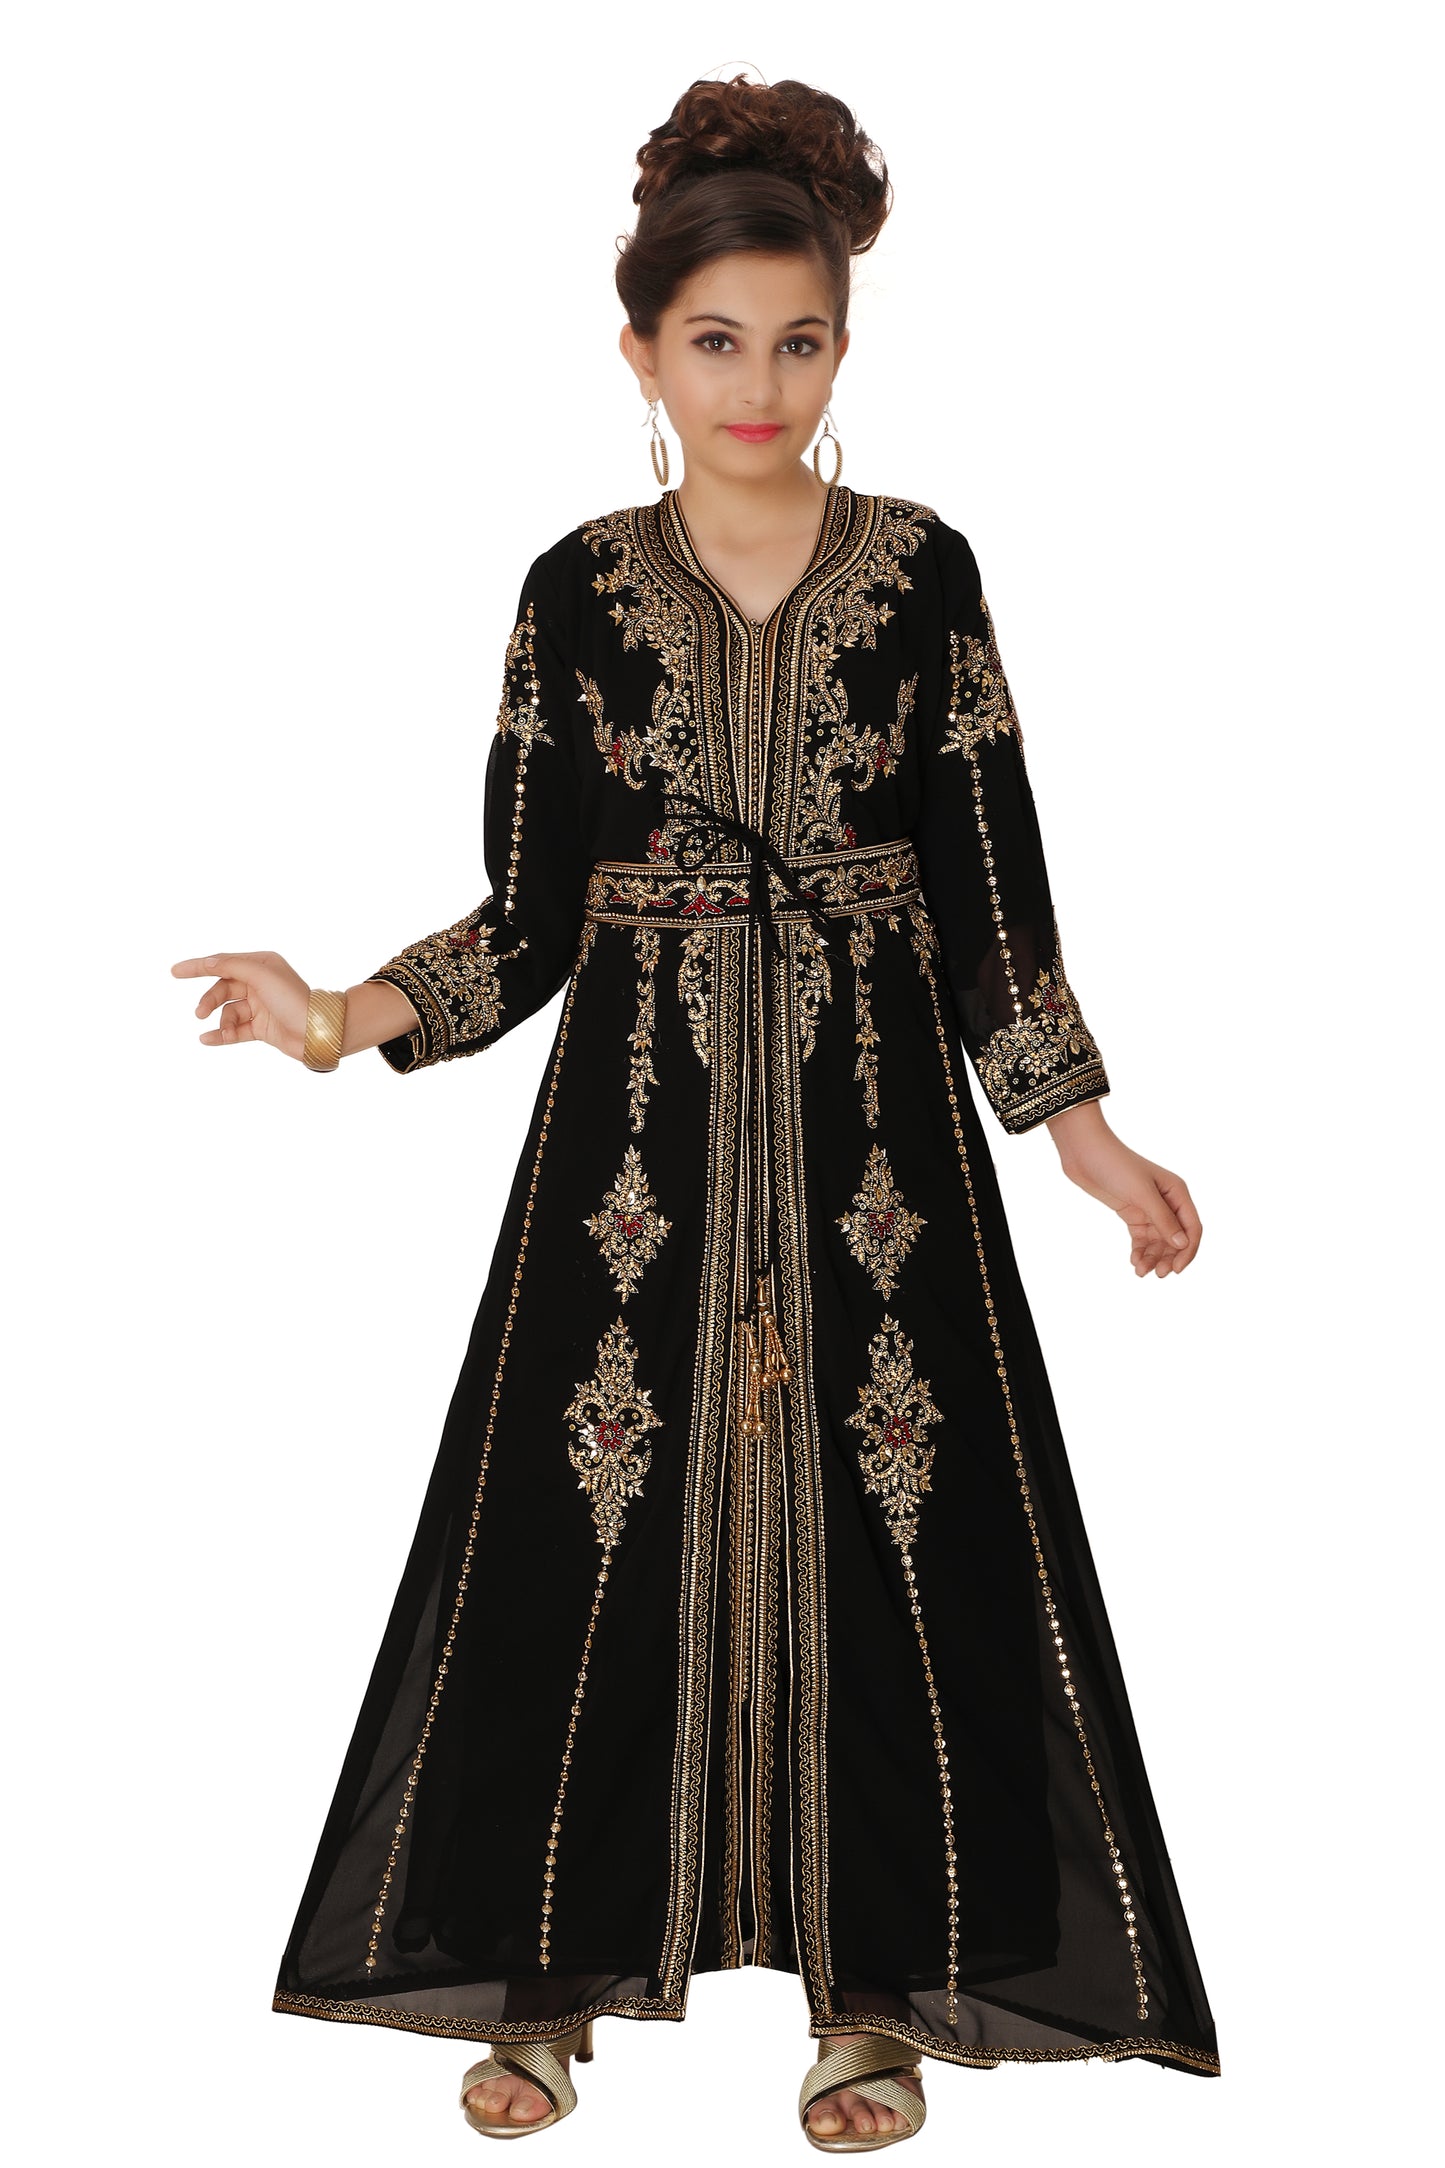 Load image into Gallery viewer, Designer Moroccan Toddler Dress Caftan For Child by Maxim Creation - Maxim Creation
